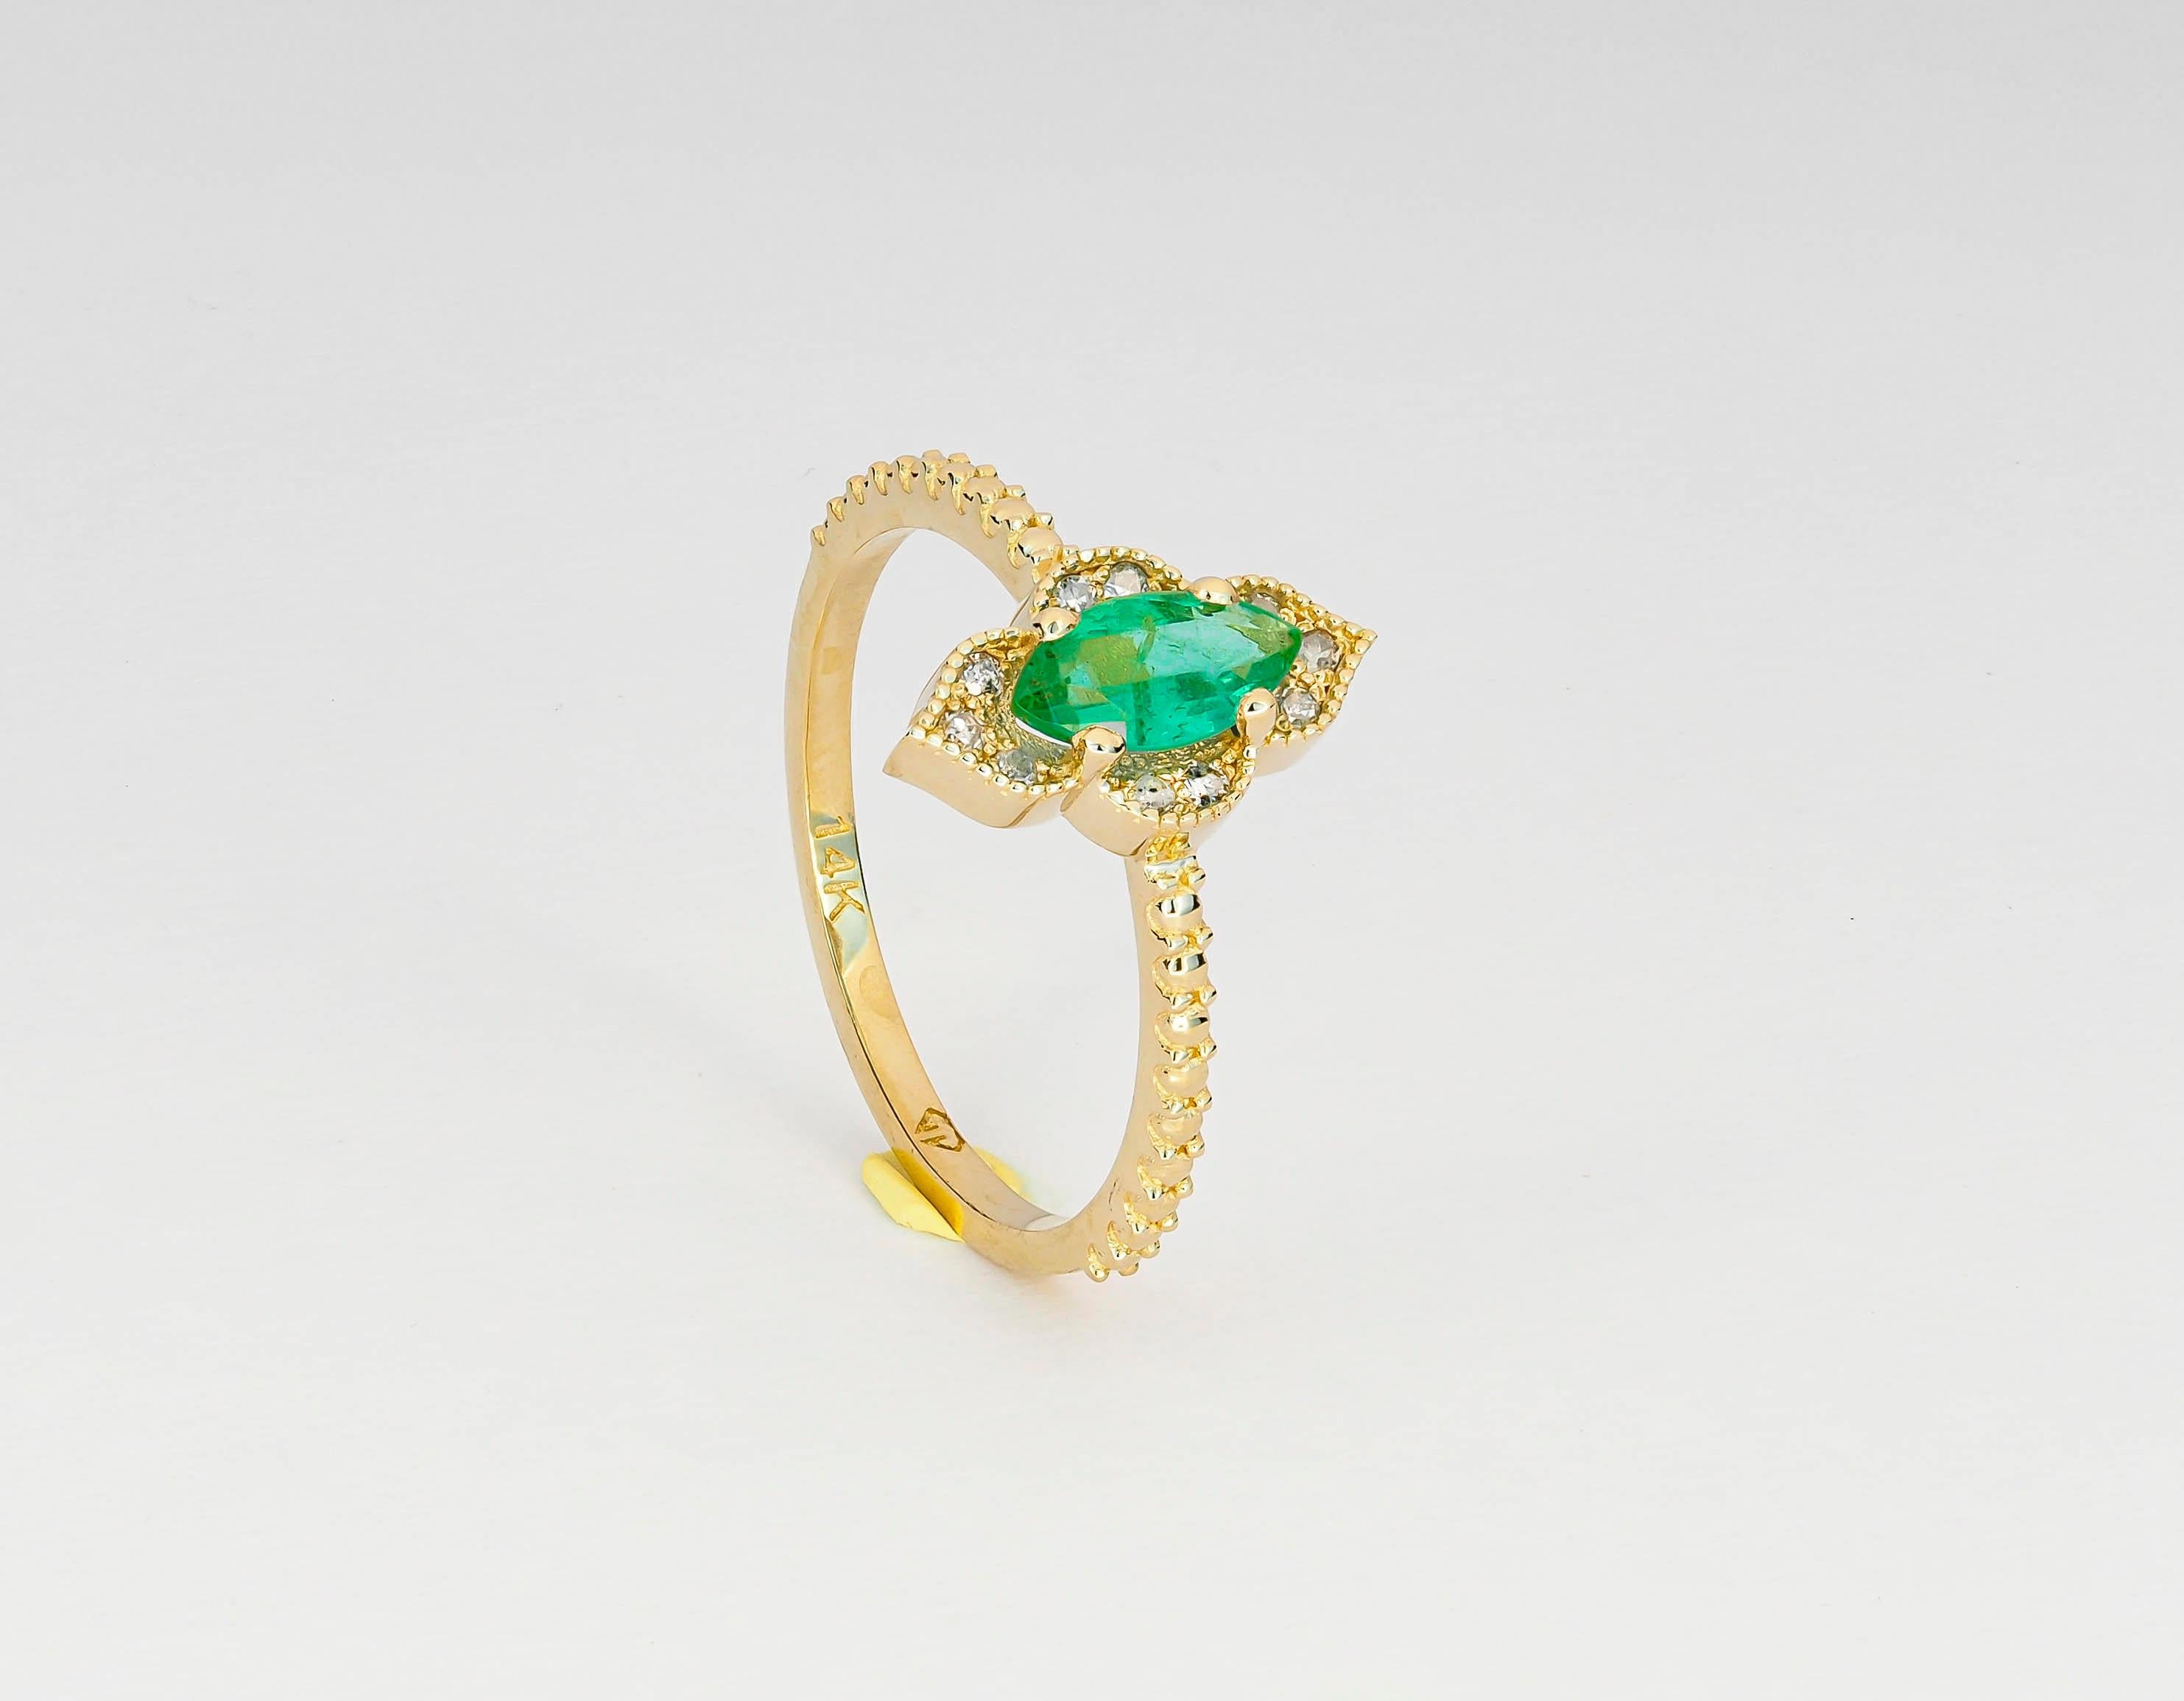 14 karat gold ring with natural emerald and diamonds. May birthstone emerald ring.
Weight: 2.02 g. depends from size
Central stones: Natural emerald
Marquise cut, weight - approx 0.70 ct in total.
Clarity: Transparent with inclusions, color -